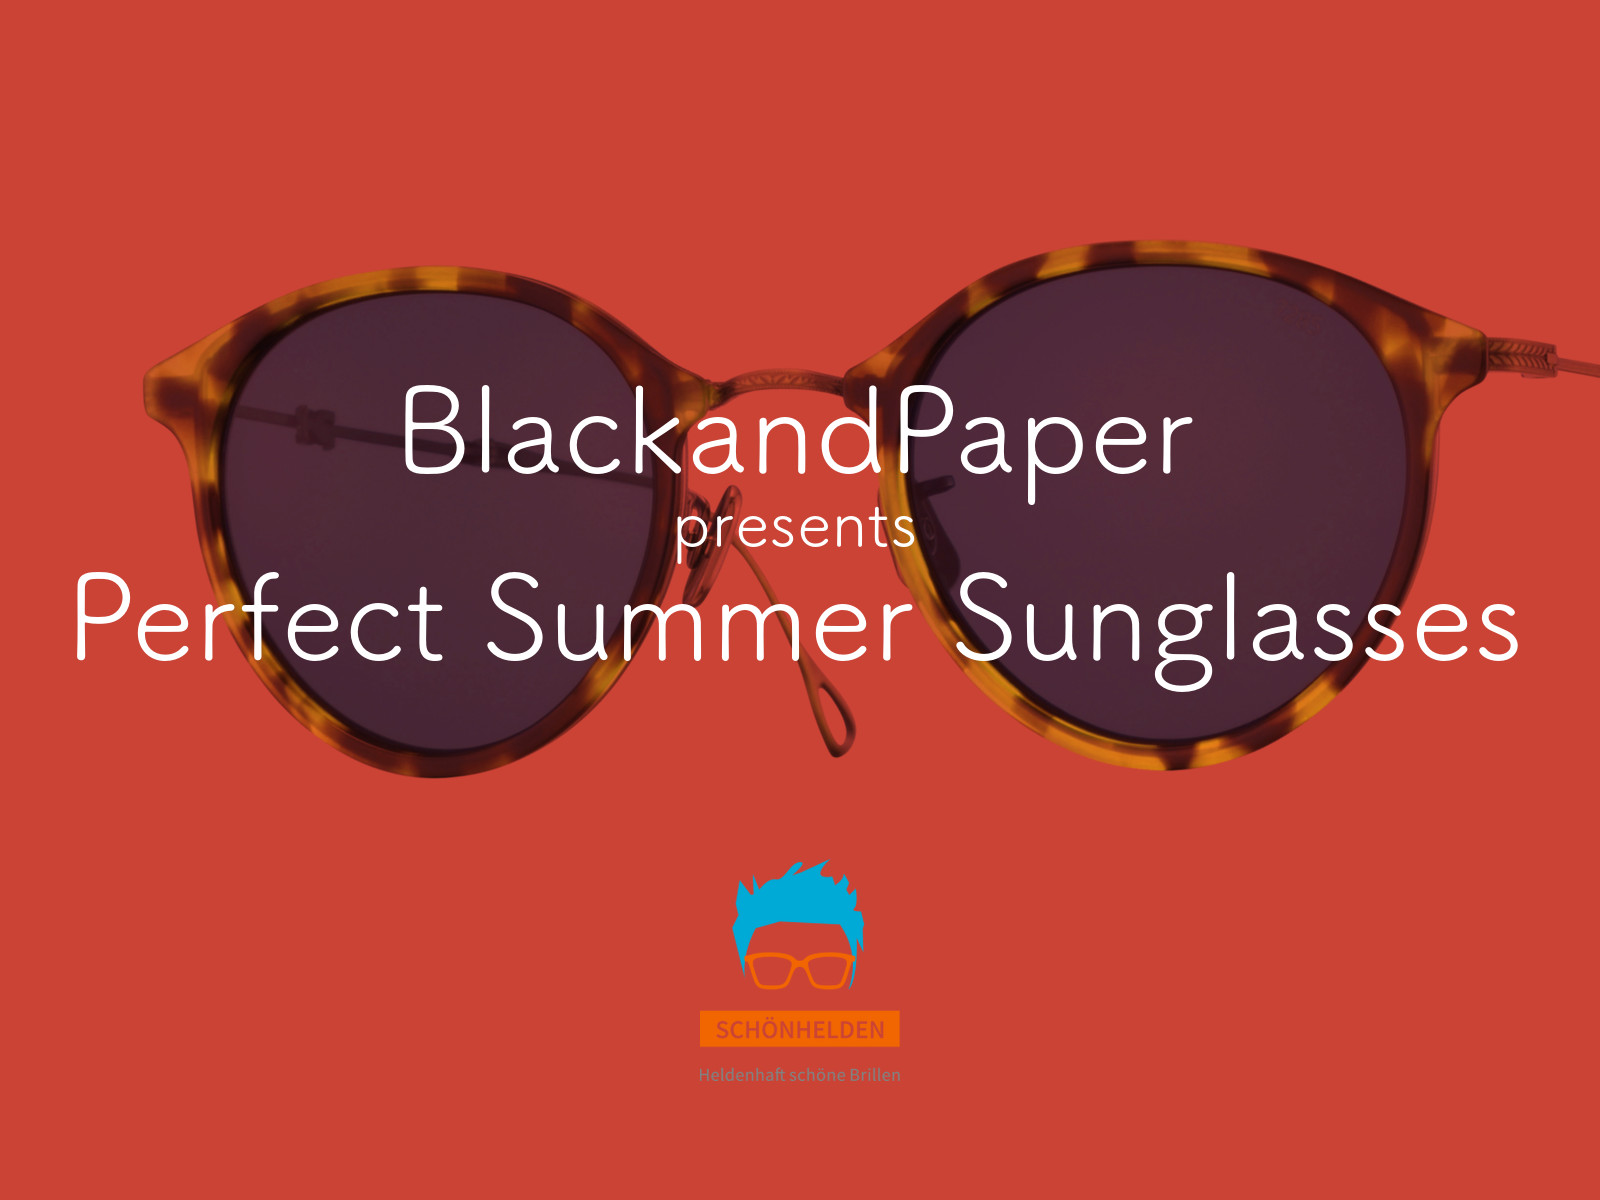 Coming Soon: Perfect Sunglasses